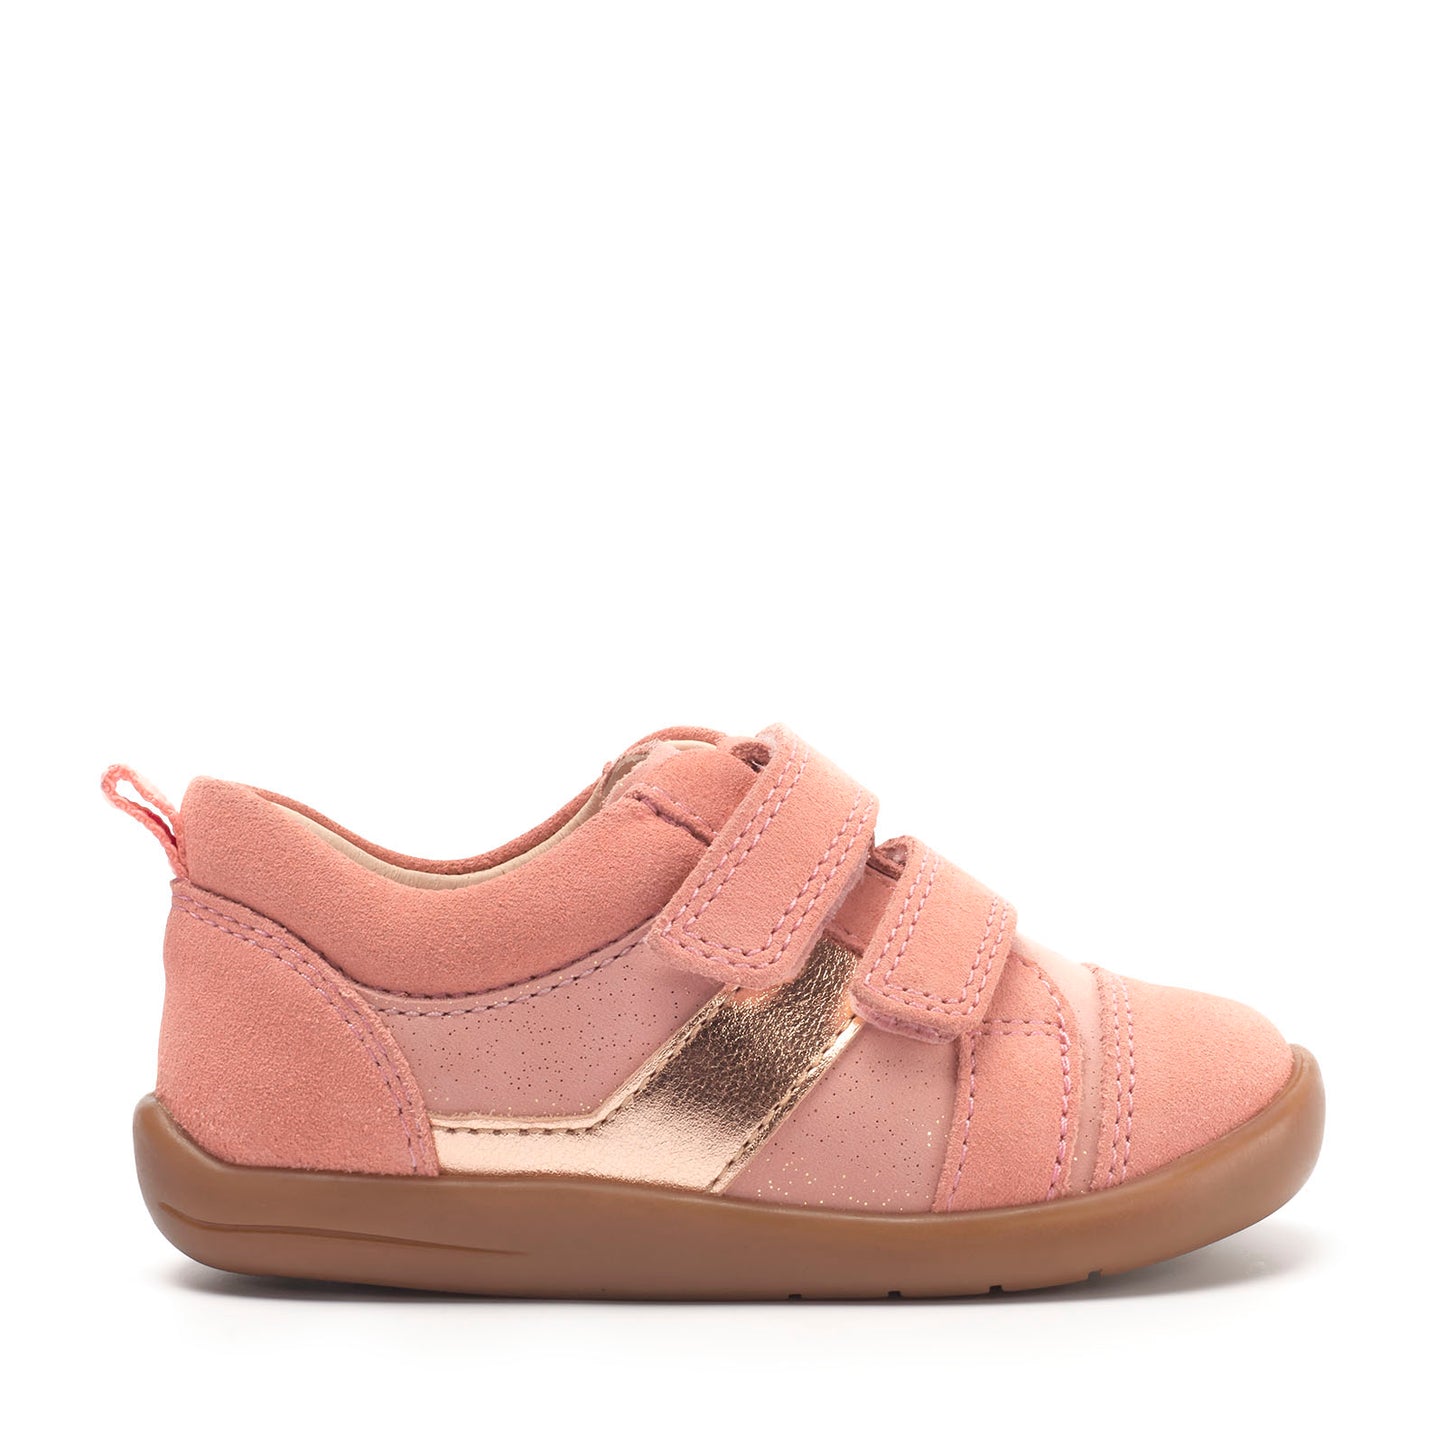 A girls casual shoe by Start Rite, style Maze, in pink and gold with double velcro fastening. Right side view.